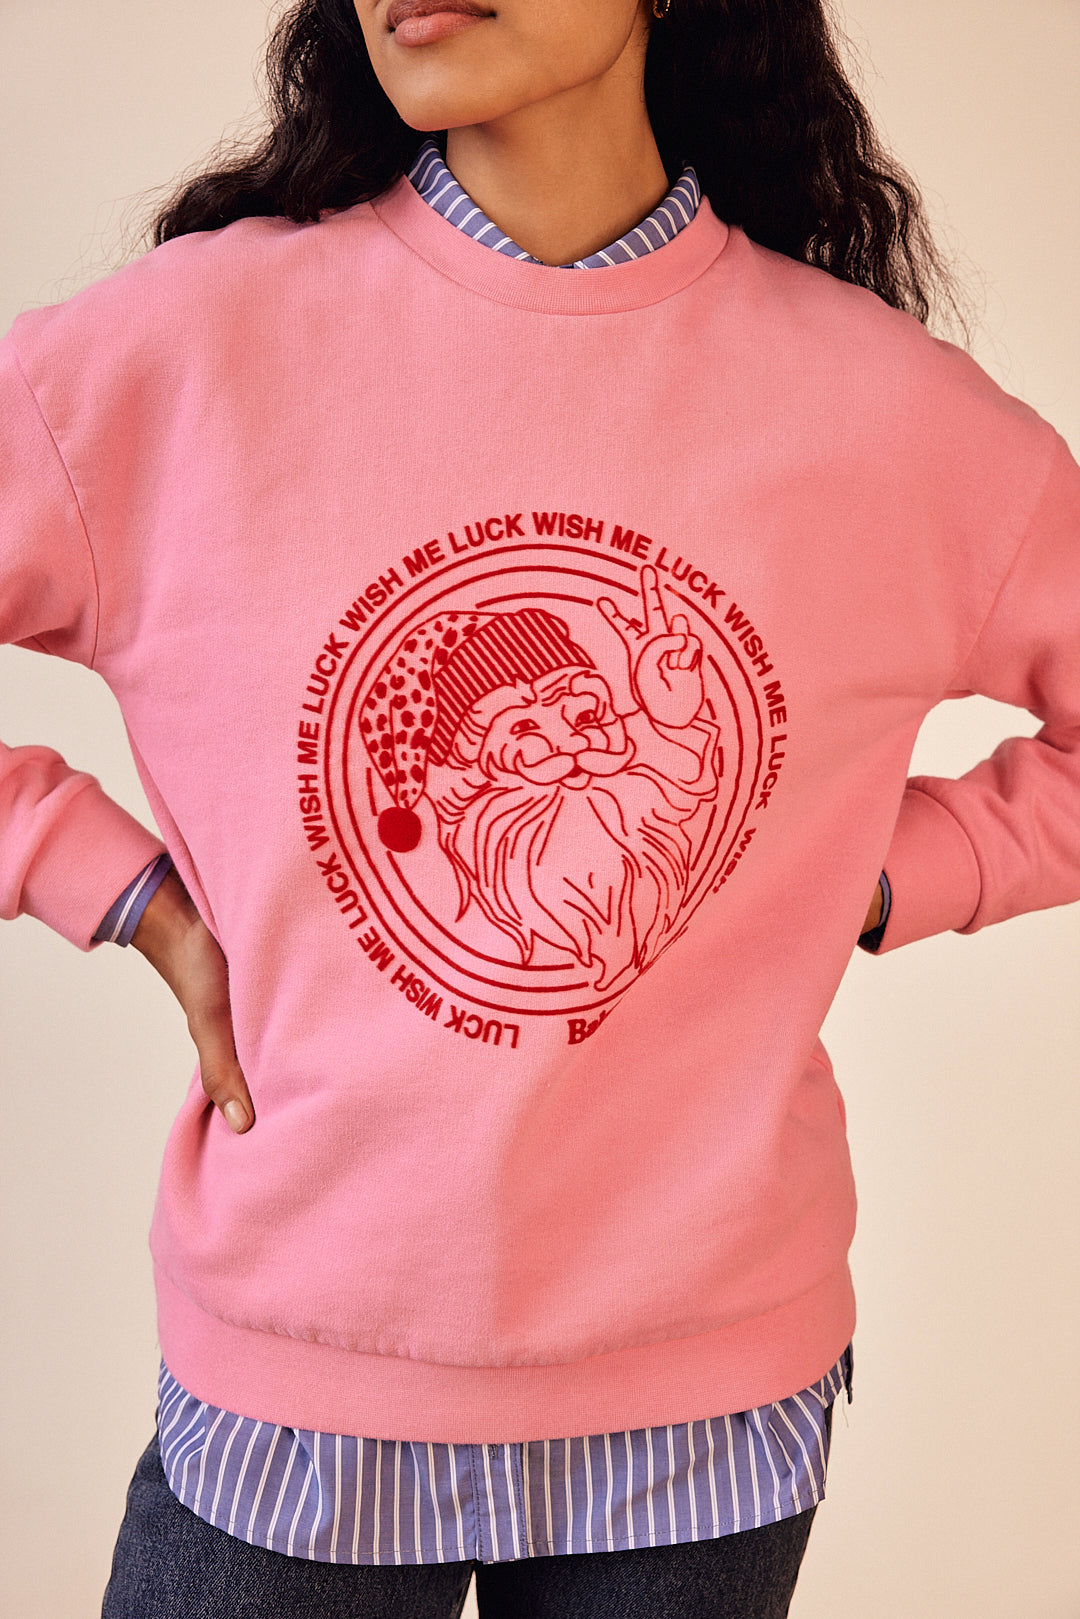 Harlow Wish me luck pink and red sweatshirt